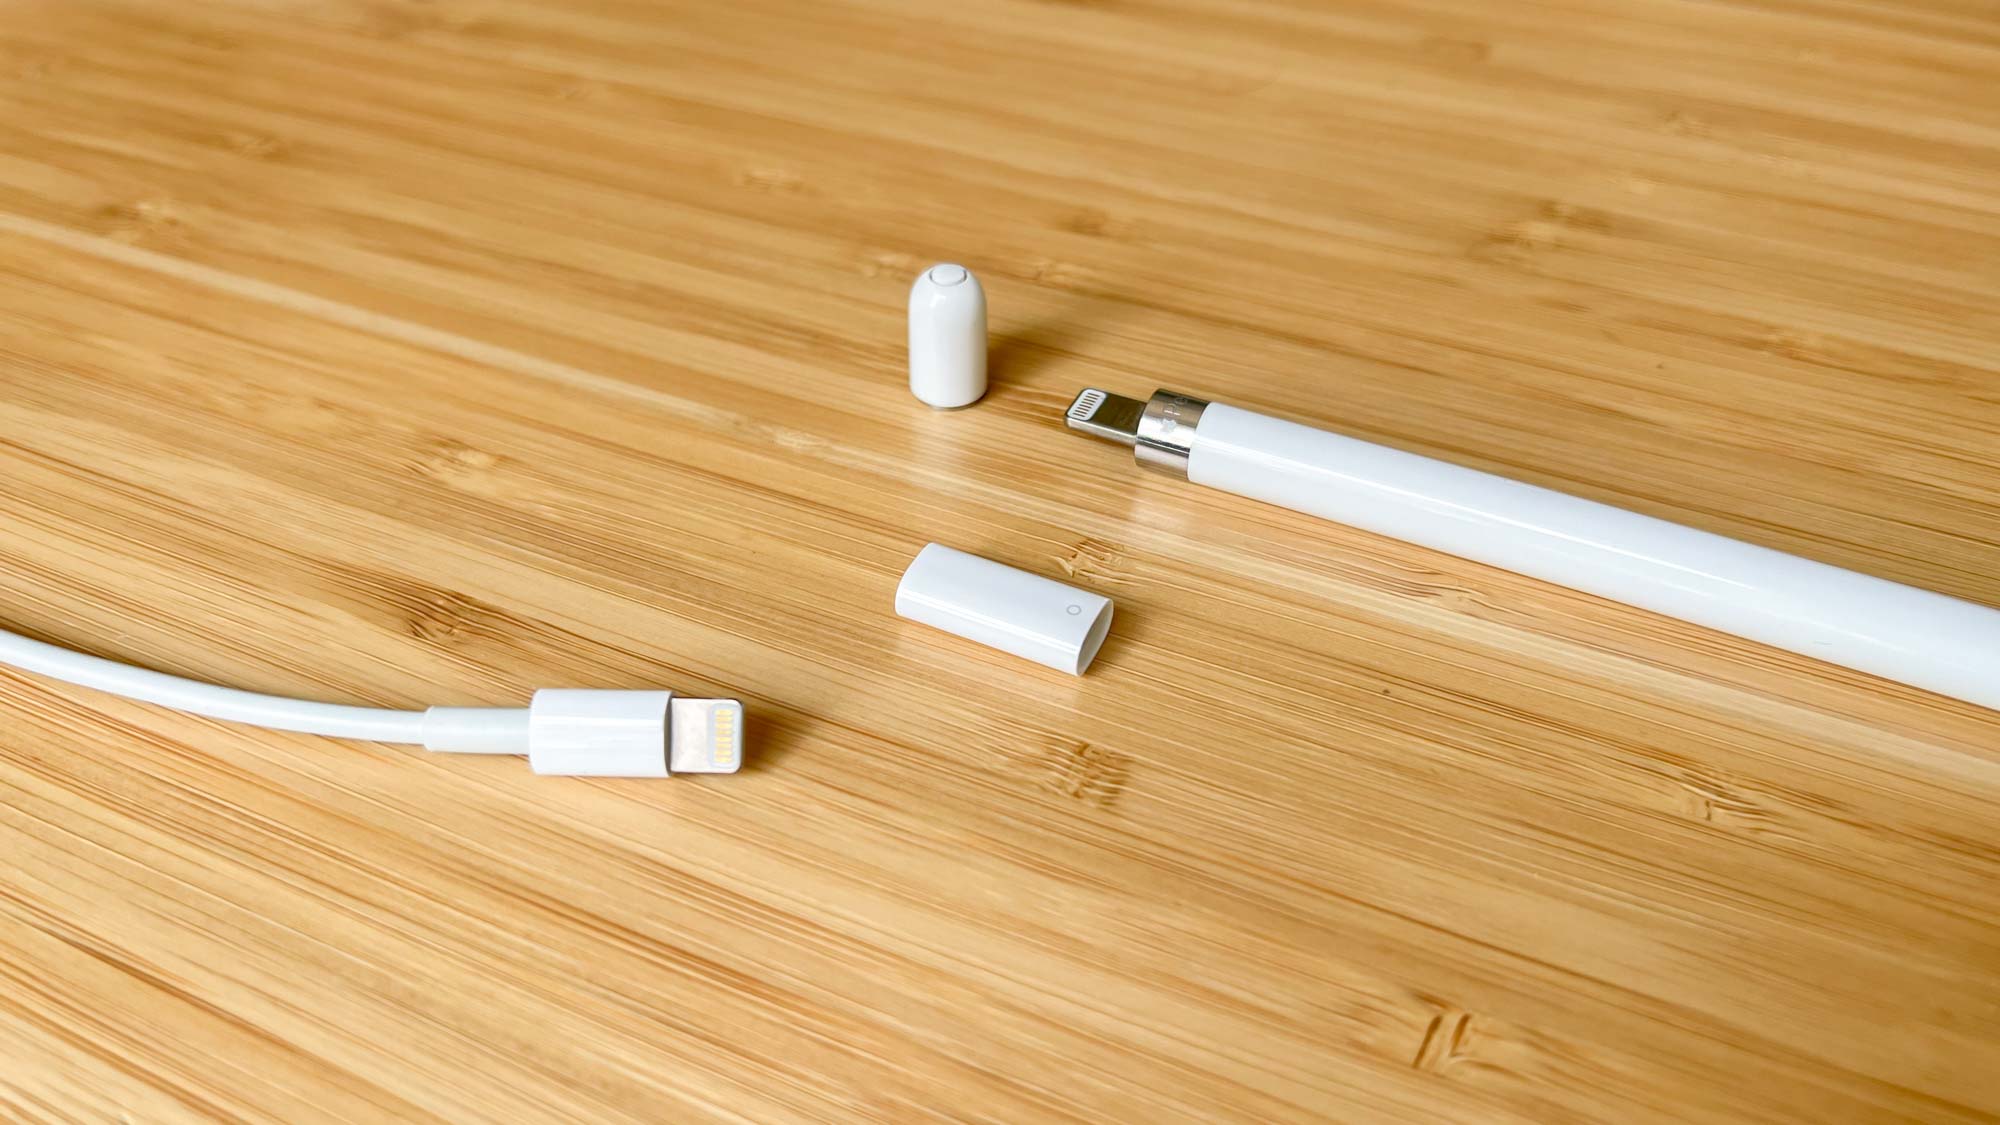 Lightning cable and Apple Pencil first generation with cover removed and Apple Pencil charging adapter